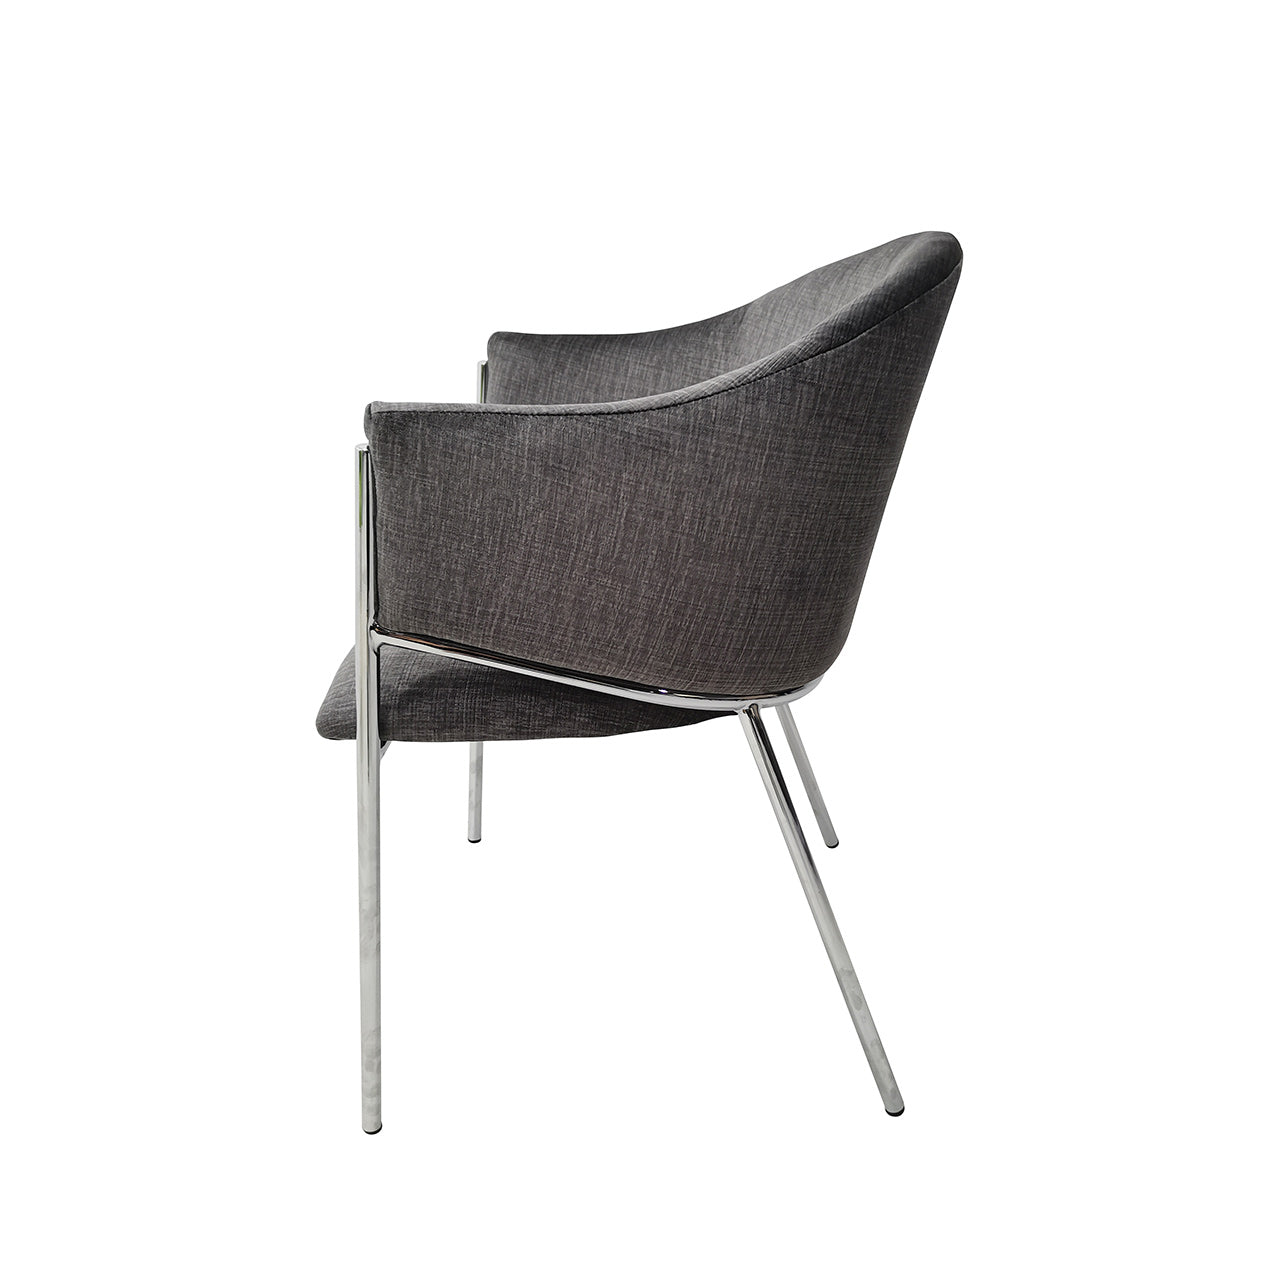 dining chair in grey color